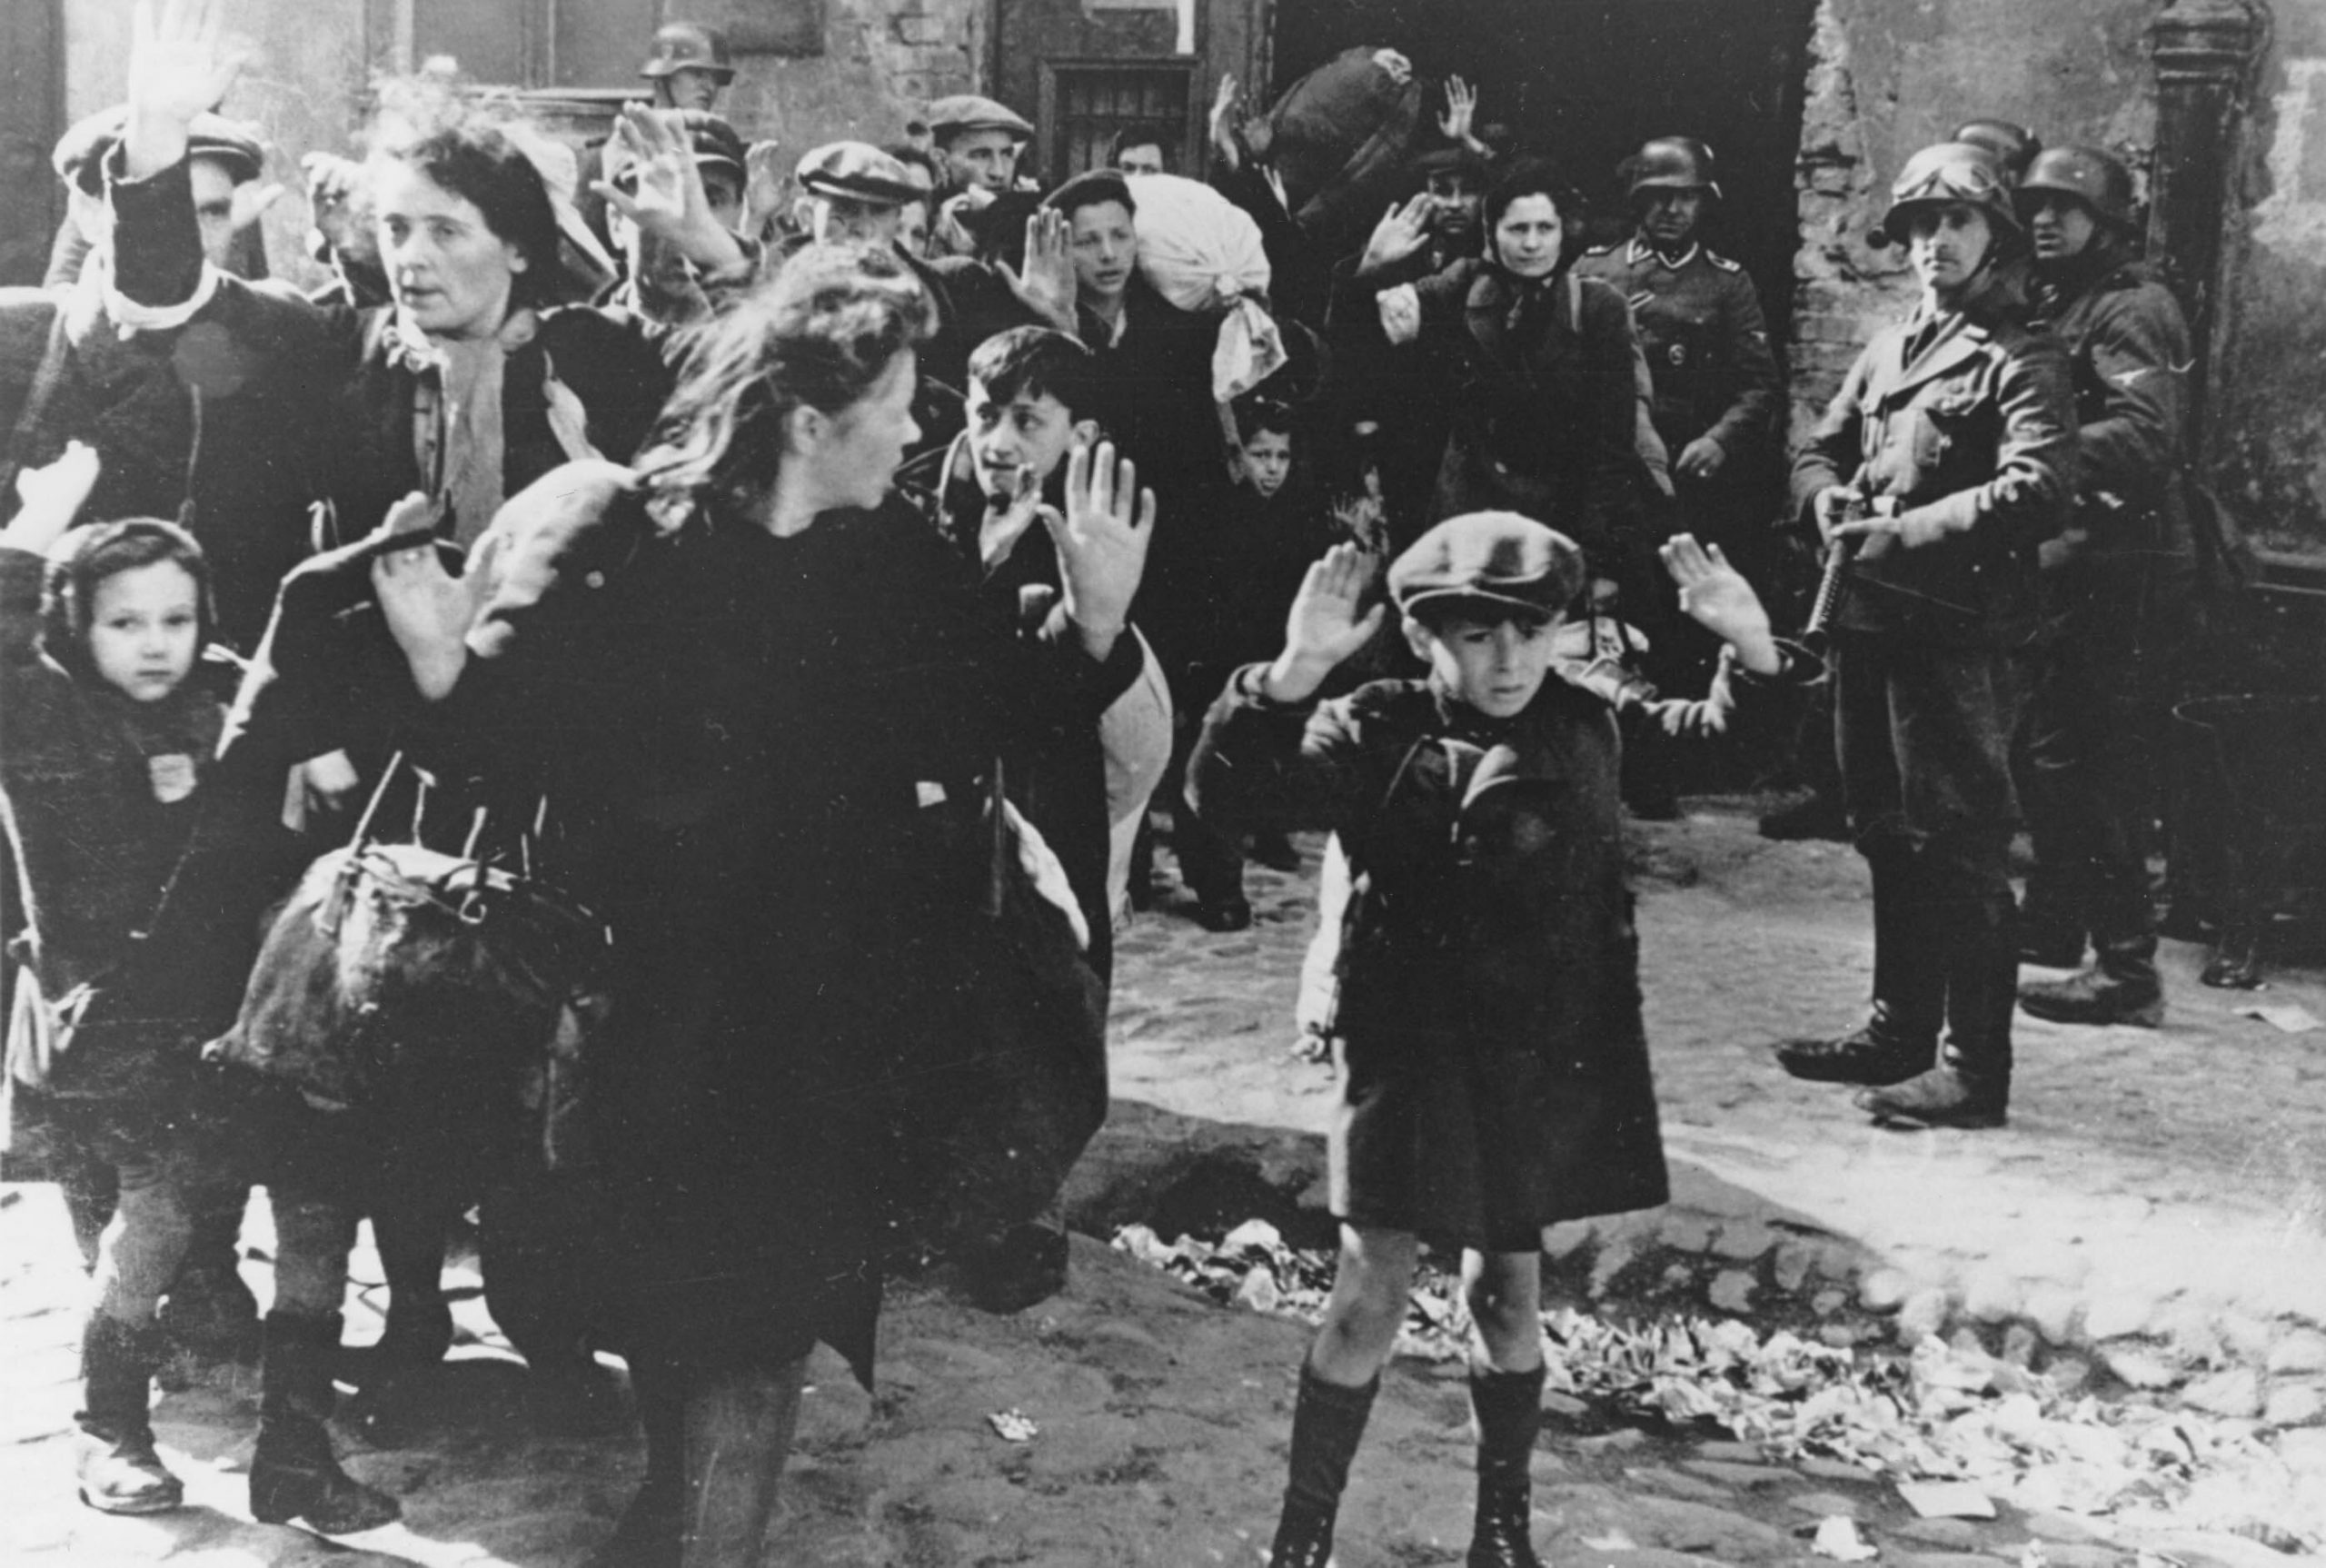 Holocaust Remembrance Day 2022: All about the Jewish community’s struggle